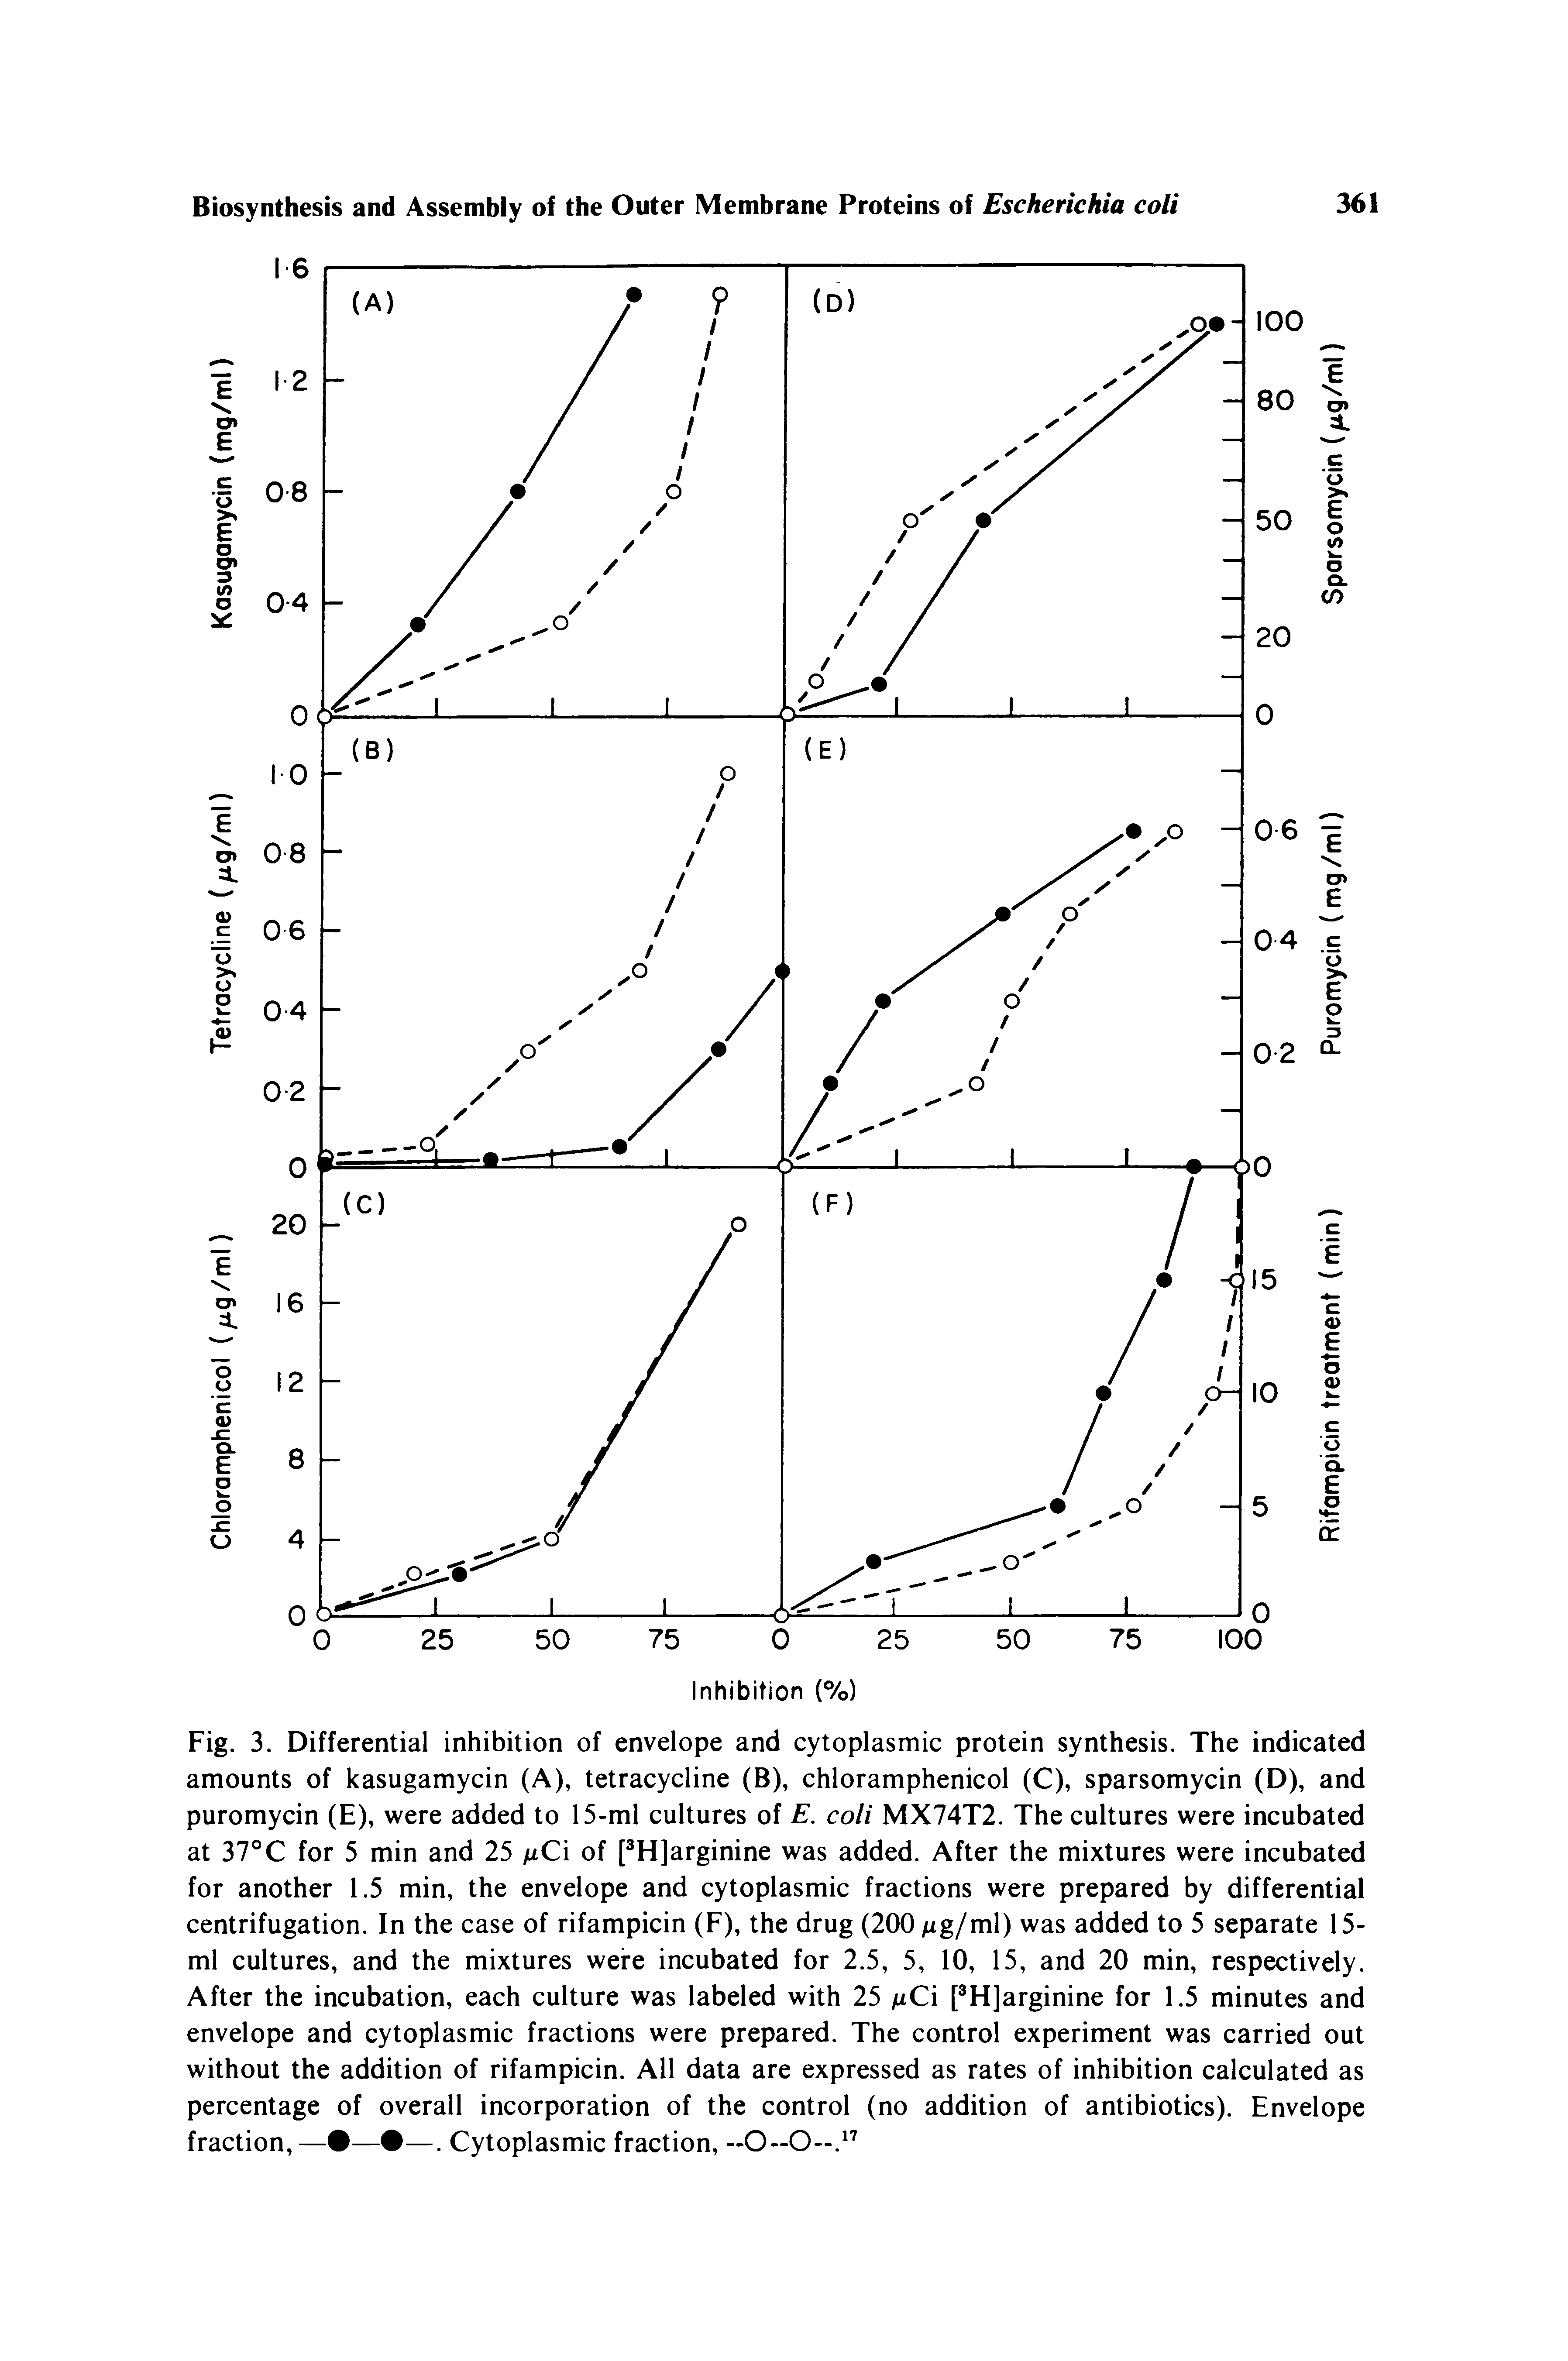 Fig. 3. Differential inhibition of envelope and cytoplasmic protein synthesis. The indicated amounts of kasugamycin (A), tetracycline (B), chloramphenicol (C), sparsomycin (D), and puromycin (E), were added to 15-ml cultures of E. coli MX74T2. The cultures were incubated at 37 C for 5 min and 25 of [ H]arginine was added. After the mixtures were incubated for another 1.5 min, the envelope and cytoplasmic fractions were prepared by differential centrifugation. In the case of rifampicin (F), the drug (200 Mg/ml) was added to 5 separate 15-ml cultures, and the mixtures were incubated for 2.5, 5, 10, 15, and 20 min, respectively. After the incubation, each culture was labeled with 25 iCi [ H]arginine for 1.5 minutes and envelope and cytoplasmic fractions were prepared. The control experiment was carried out without the addition of rifampicin. All data are expressed as rates of inhibition calculated as percentage of overall incorporation of the control (no addition of antibiotics). Envelope fraction,— — —. Cytoplasmic fraction, -0-0-. ...